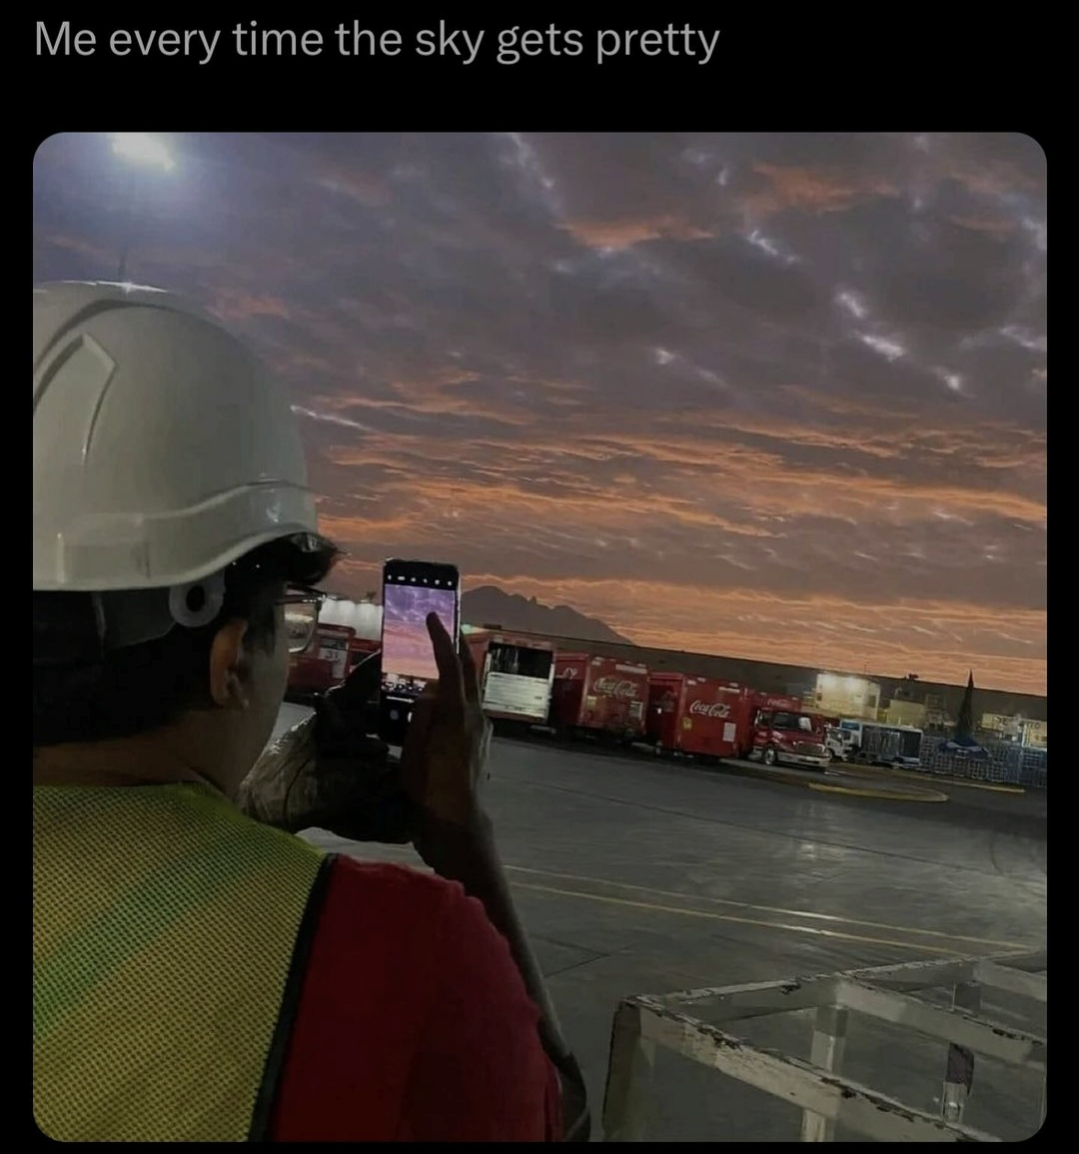 Half of my photos are of the sky